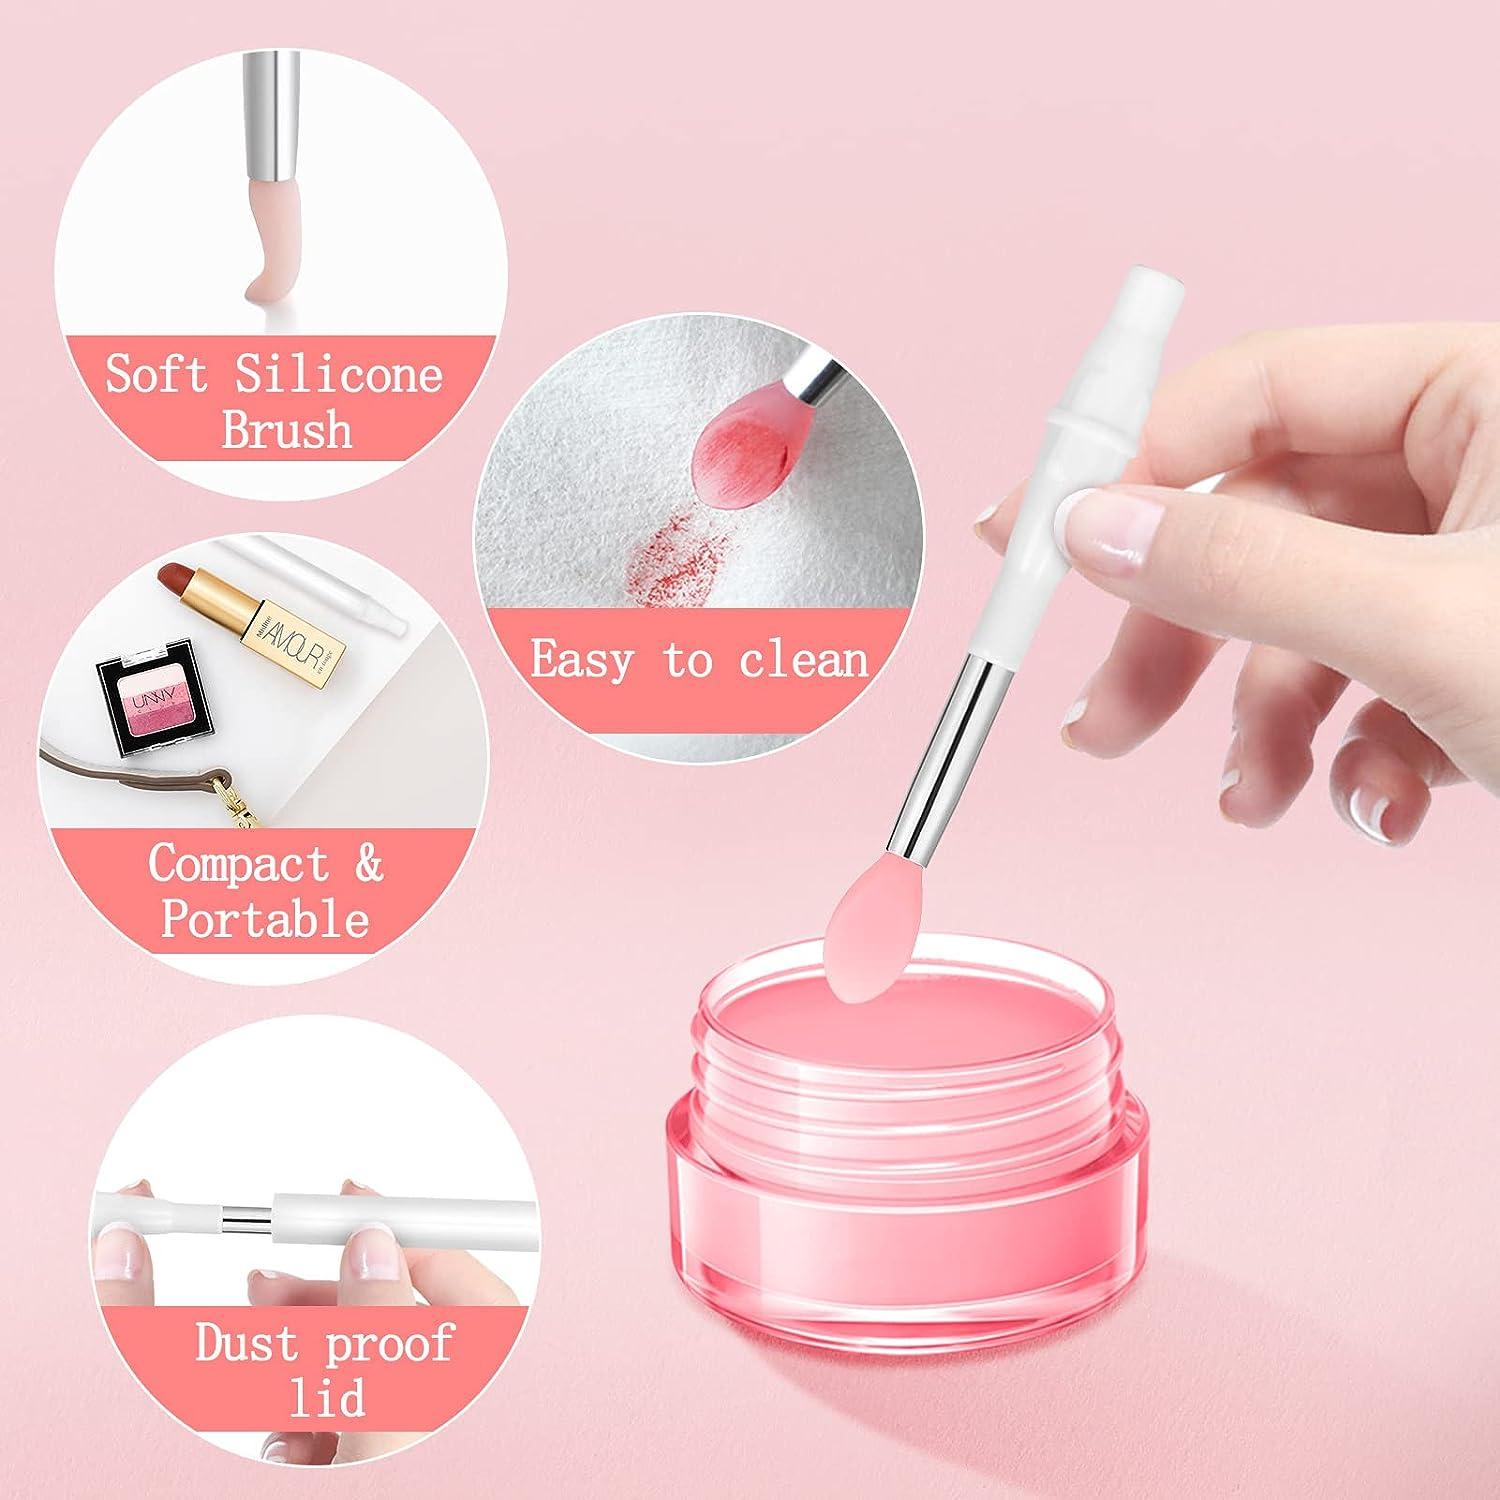 Silicone Lip Brush, 6pcs Makeup Brushes with Dirt-proof Caps for Protection, Lipstick Applicator Brushes for Lip Gloss, Lip Mask, Eyeshadow, Lip Cream